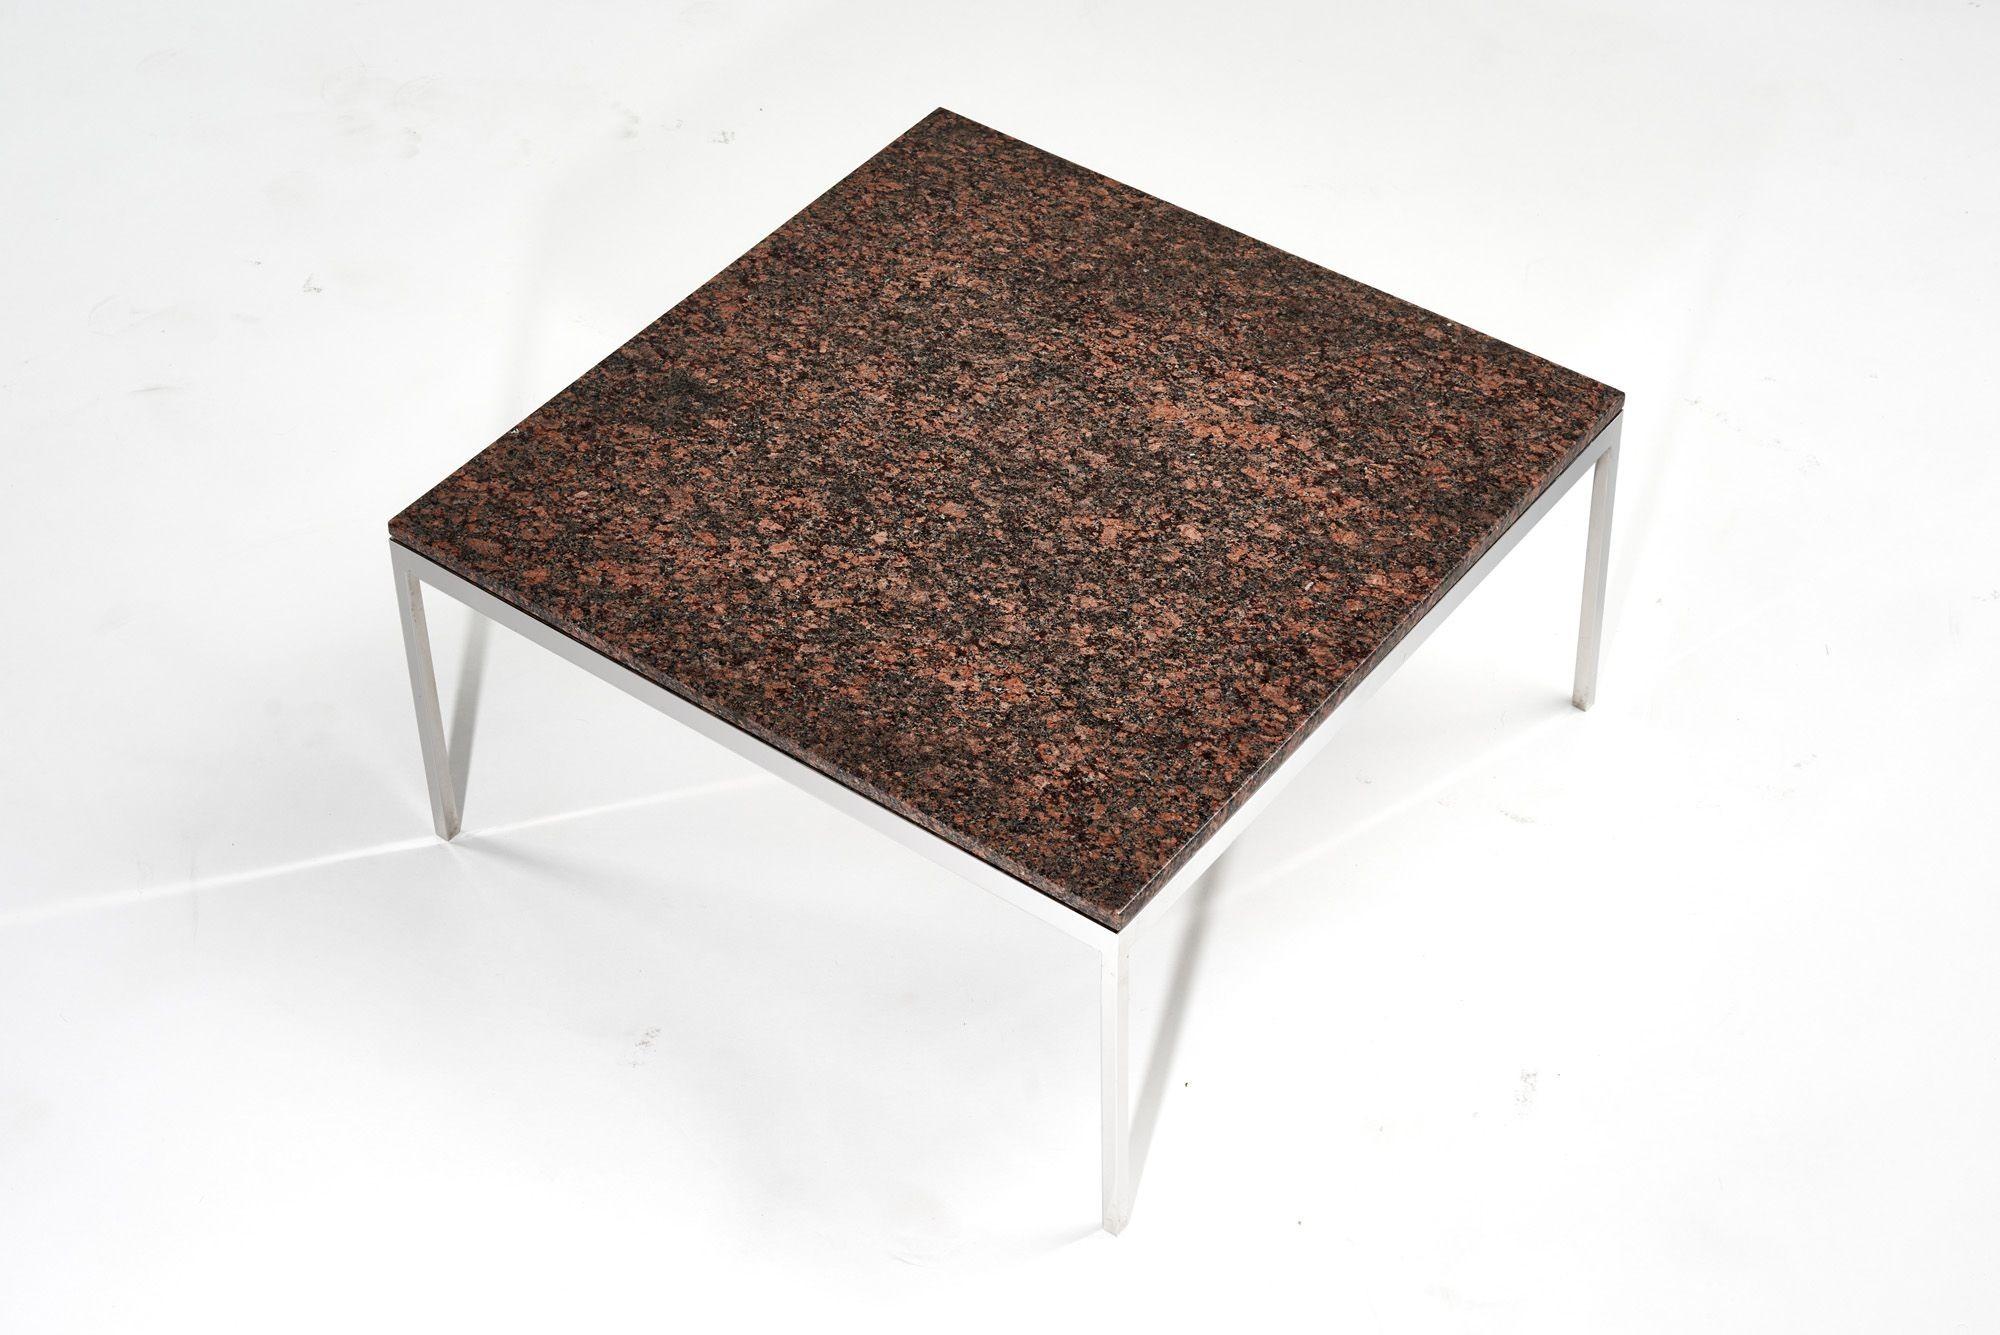 American Nicos Zographos Brown Granite and Stainless Steel Coffee Table, 1970 For Sale